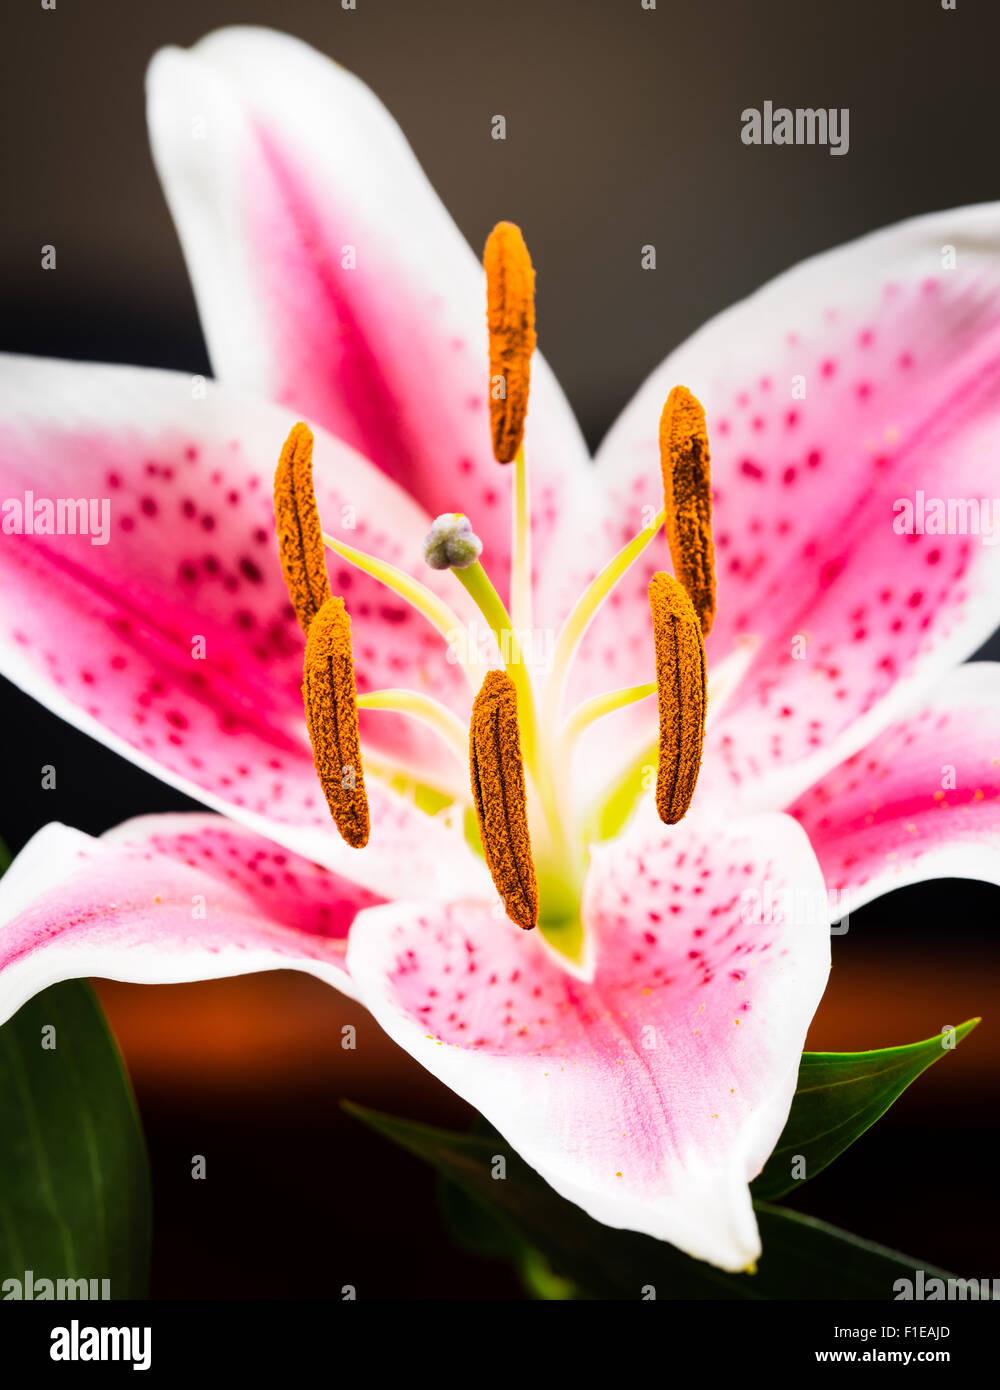 Closeup of single pink tiger lily flower in bloom Stock Photo